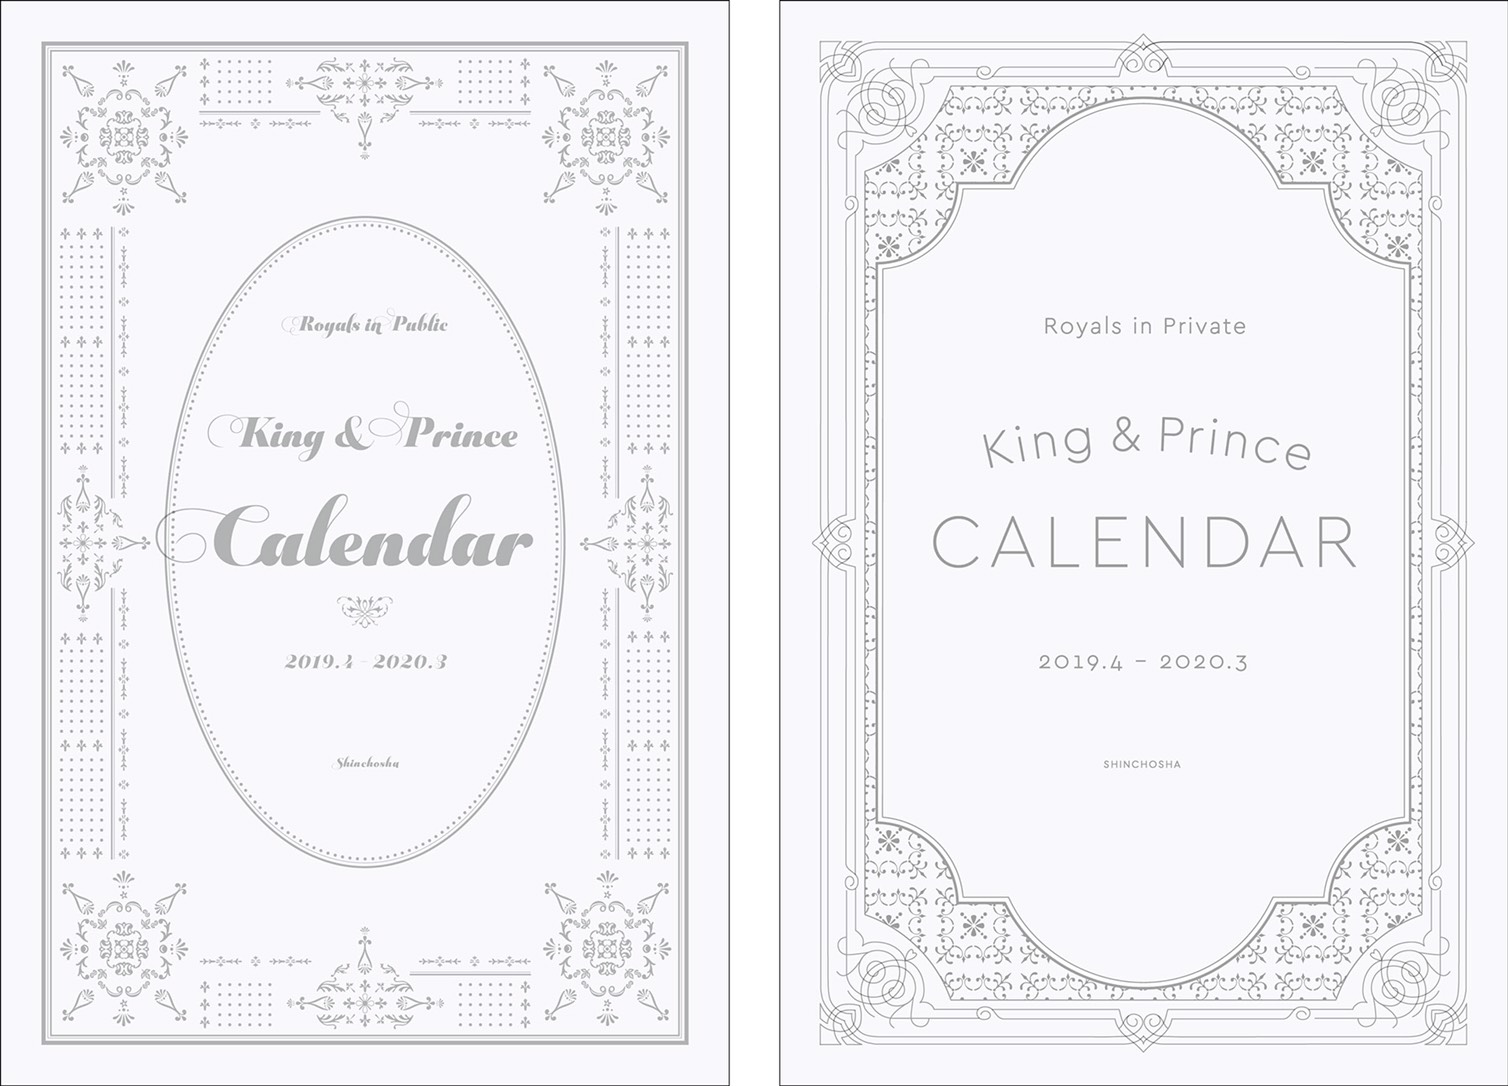 King ＆ Princeカレンダー2019．4→2020．3 Johnnys’ Official